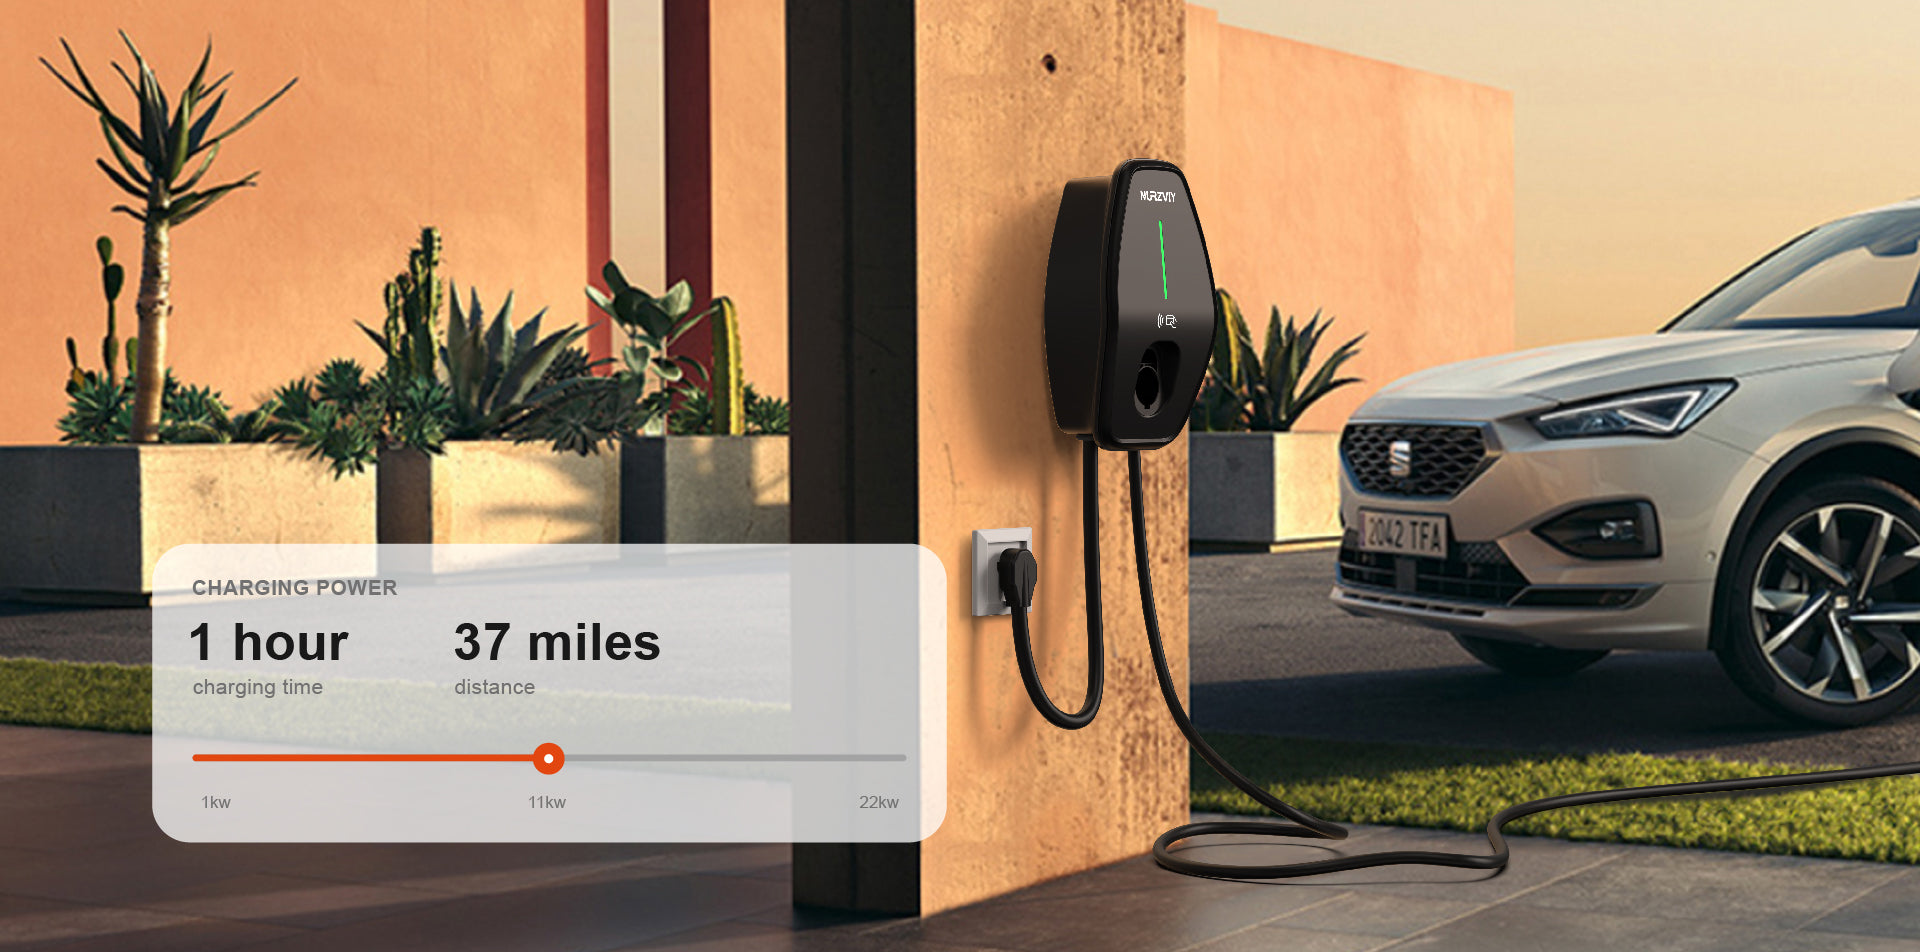 Nurzviy Plug-in EV Charger for Home High-speed Charging Solution